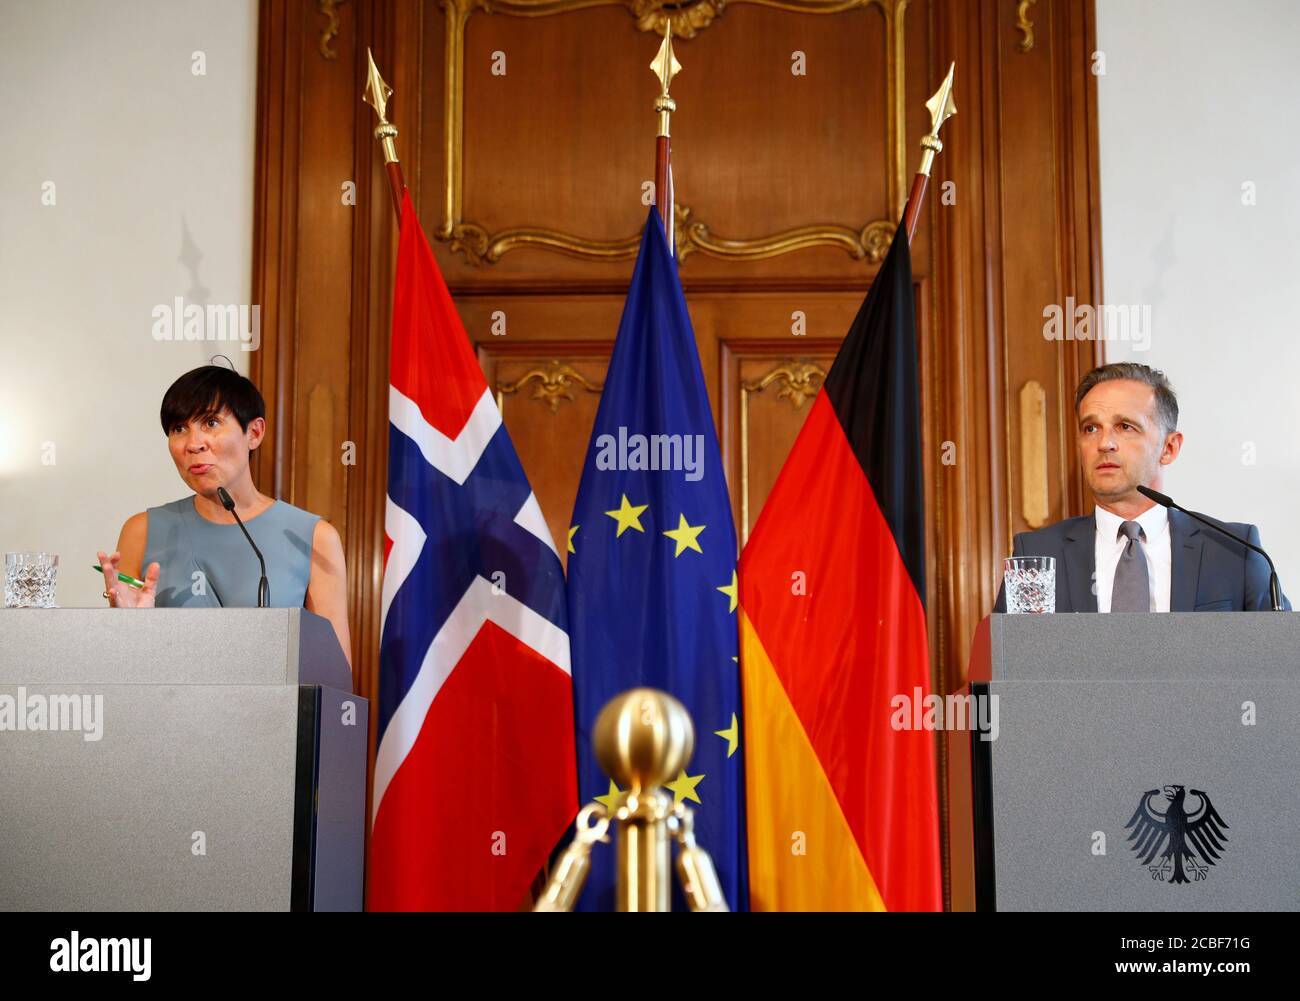 Berlin, Germany. 13th Aug, 2020. Heiko Maas (r), Foreign Minister of Germany, and his Norwegian counterpart Ine Marie Eriksen Soreide hold a joint press conference in connection with the coronavirus pandemic in the guest house of the Foreign Ministry in Villa Borsig. Credit: Fabrizio Bensch/Reuters Pool/dpa/Alamy Live News Stock Photo